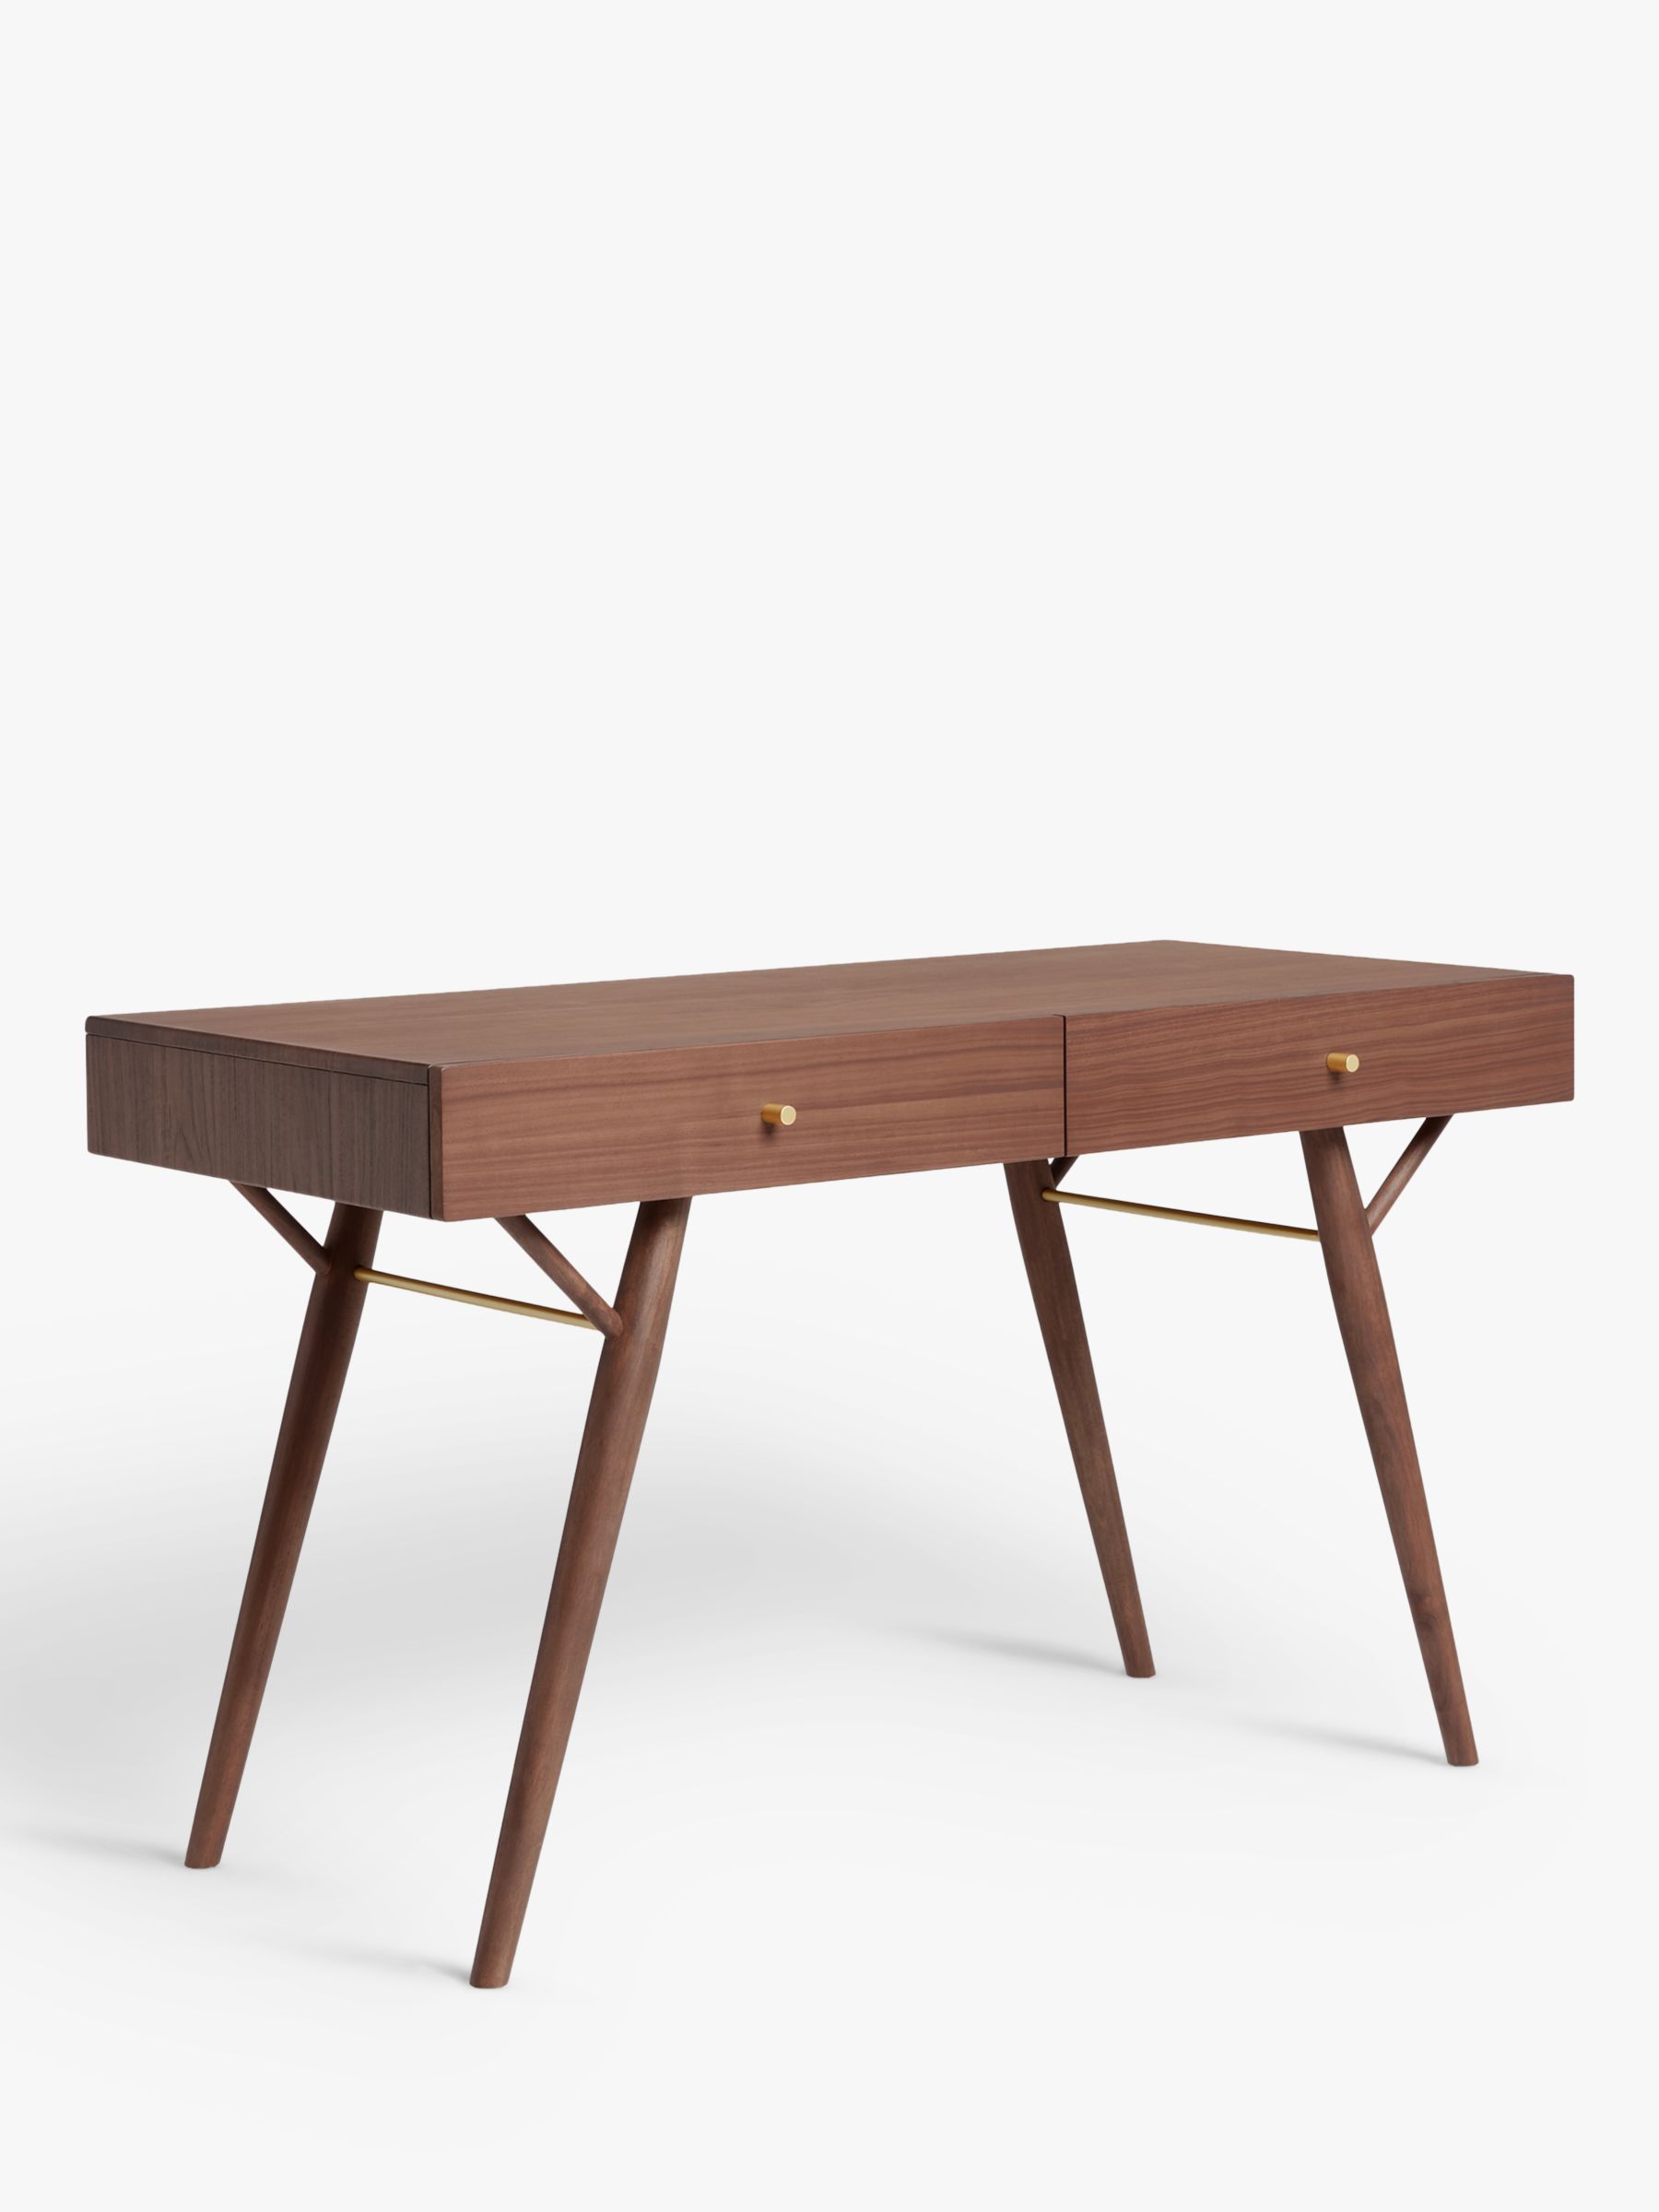 Photo of John lewis + swoon penny desk natural